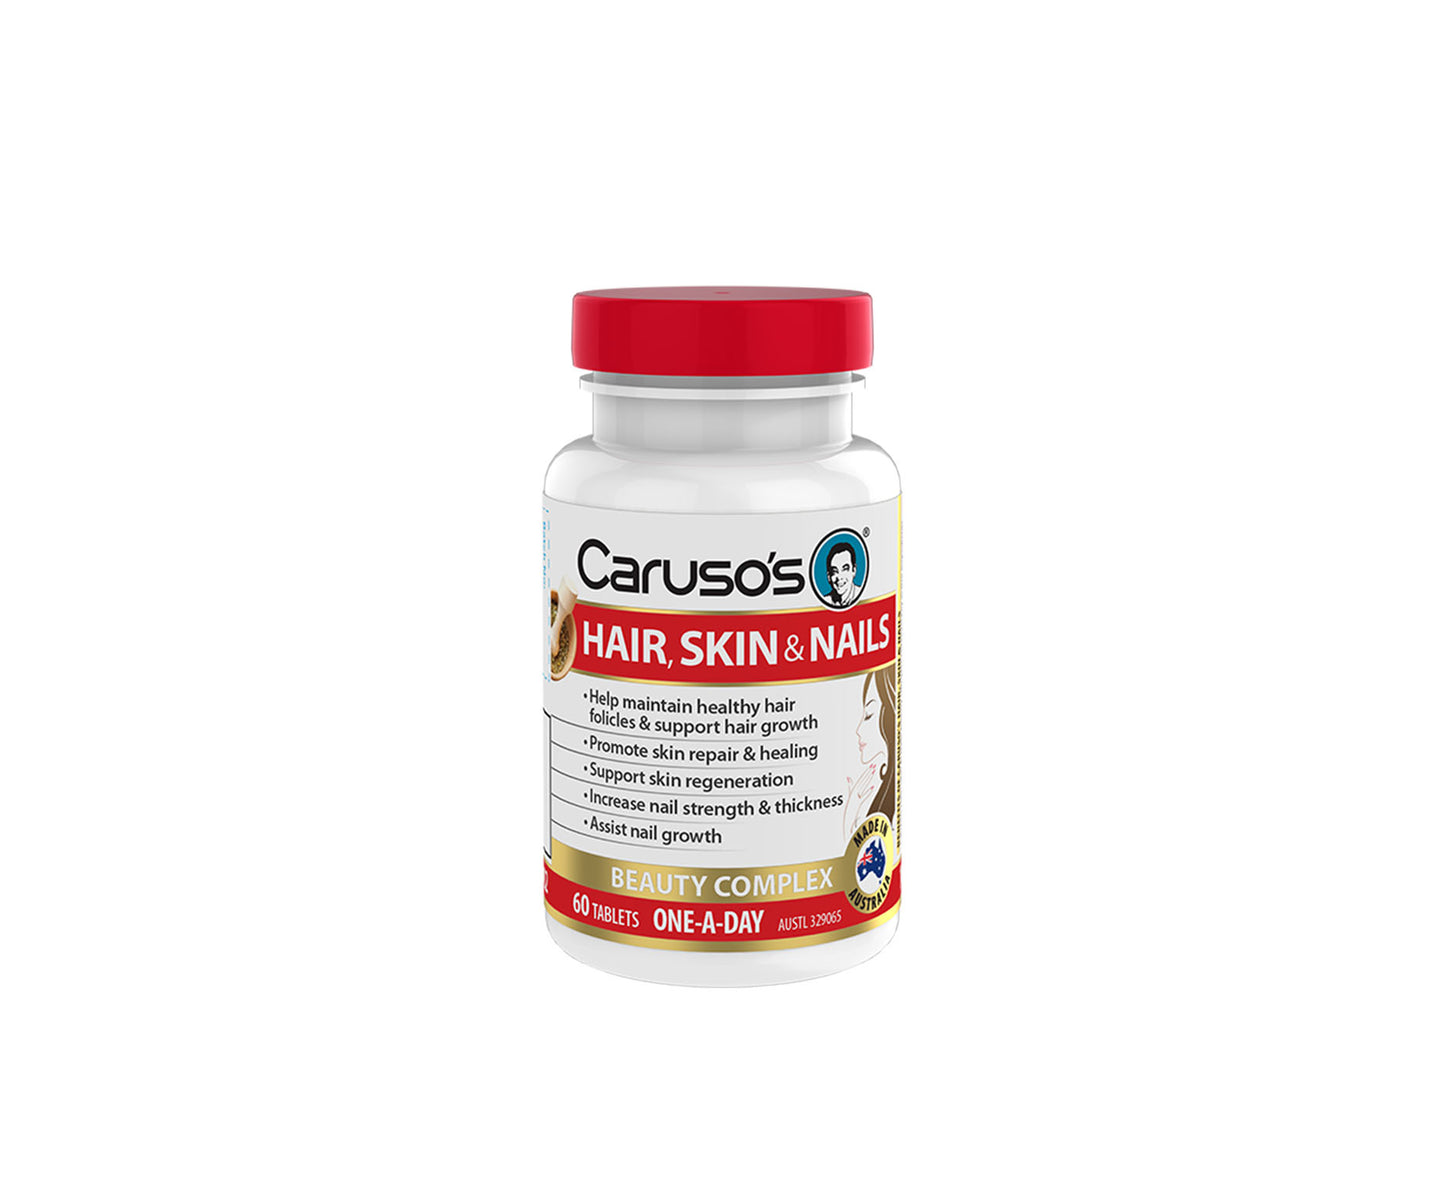 Caruso's Hair, Skin & Nails Tablets 60